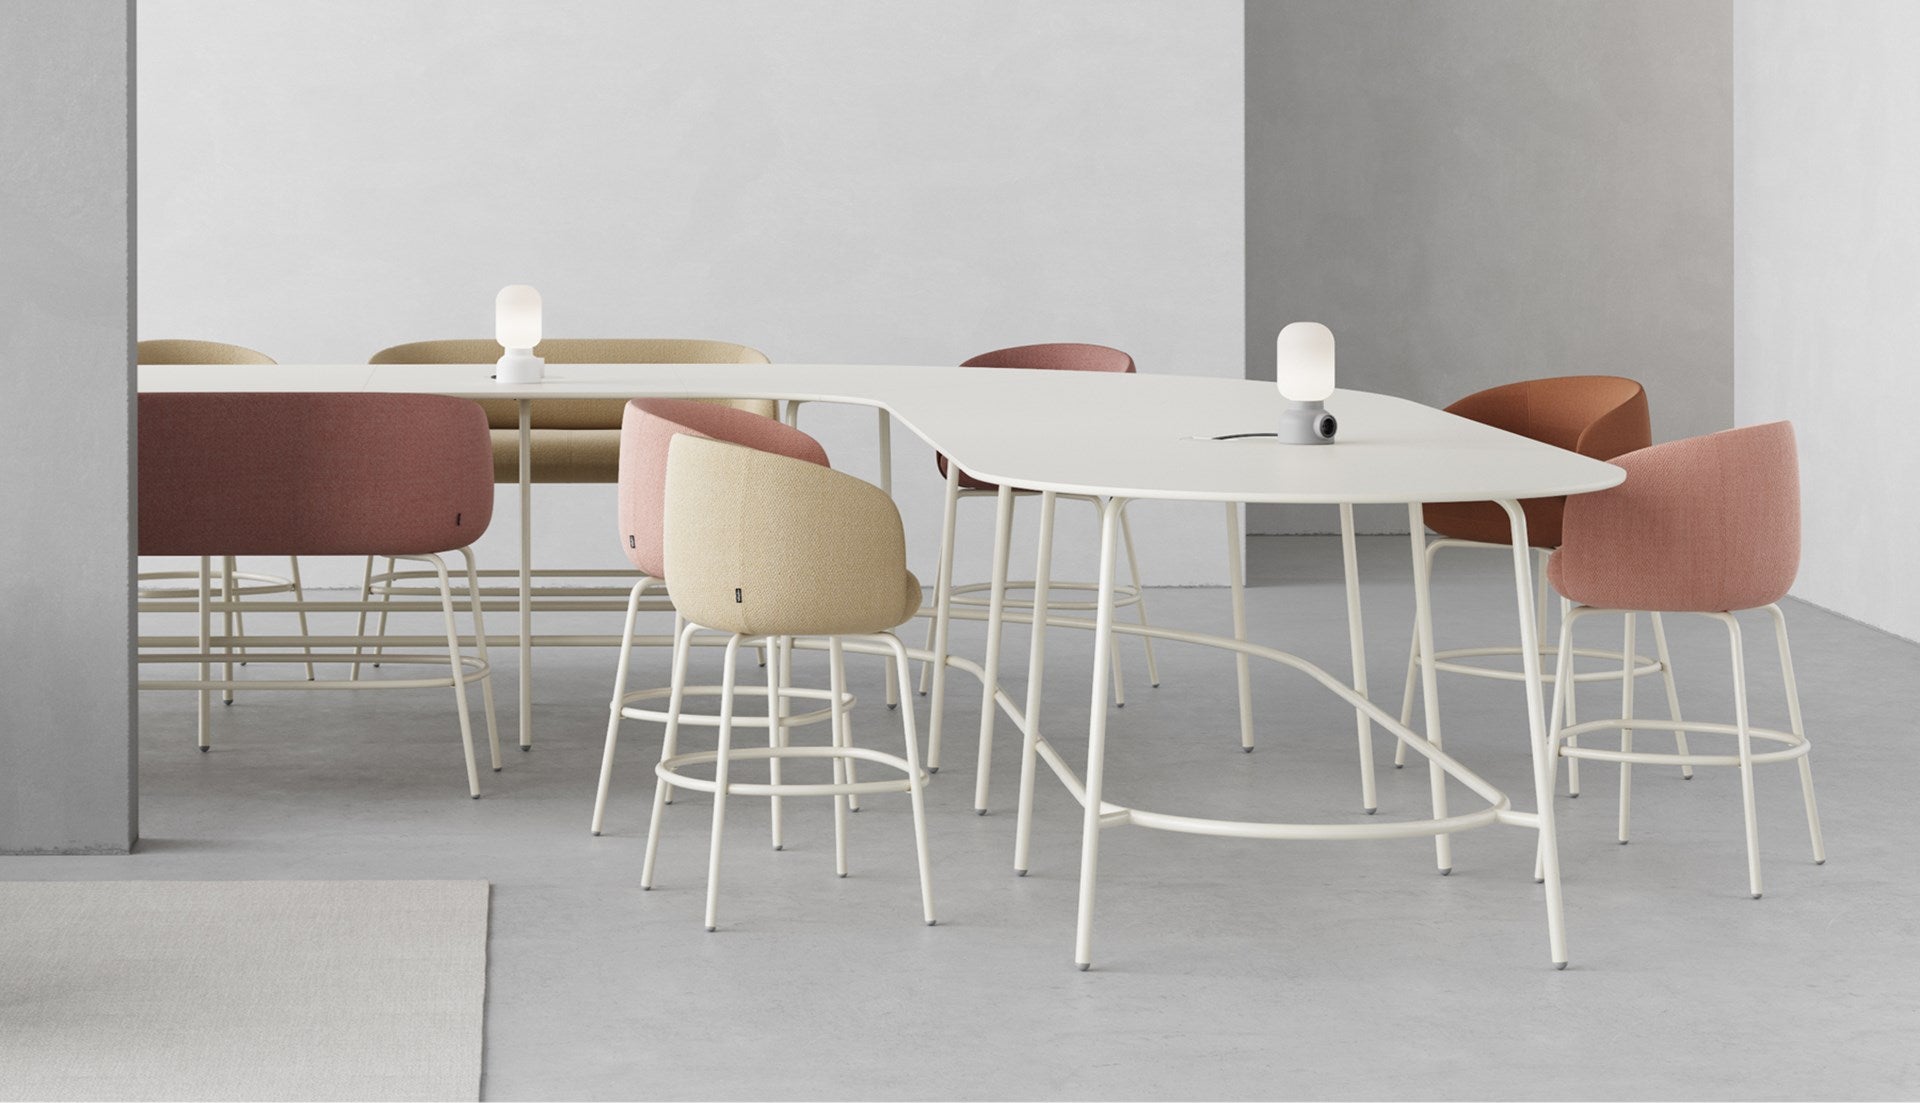 +Halle Nest Low Modular Table System